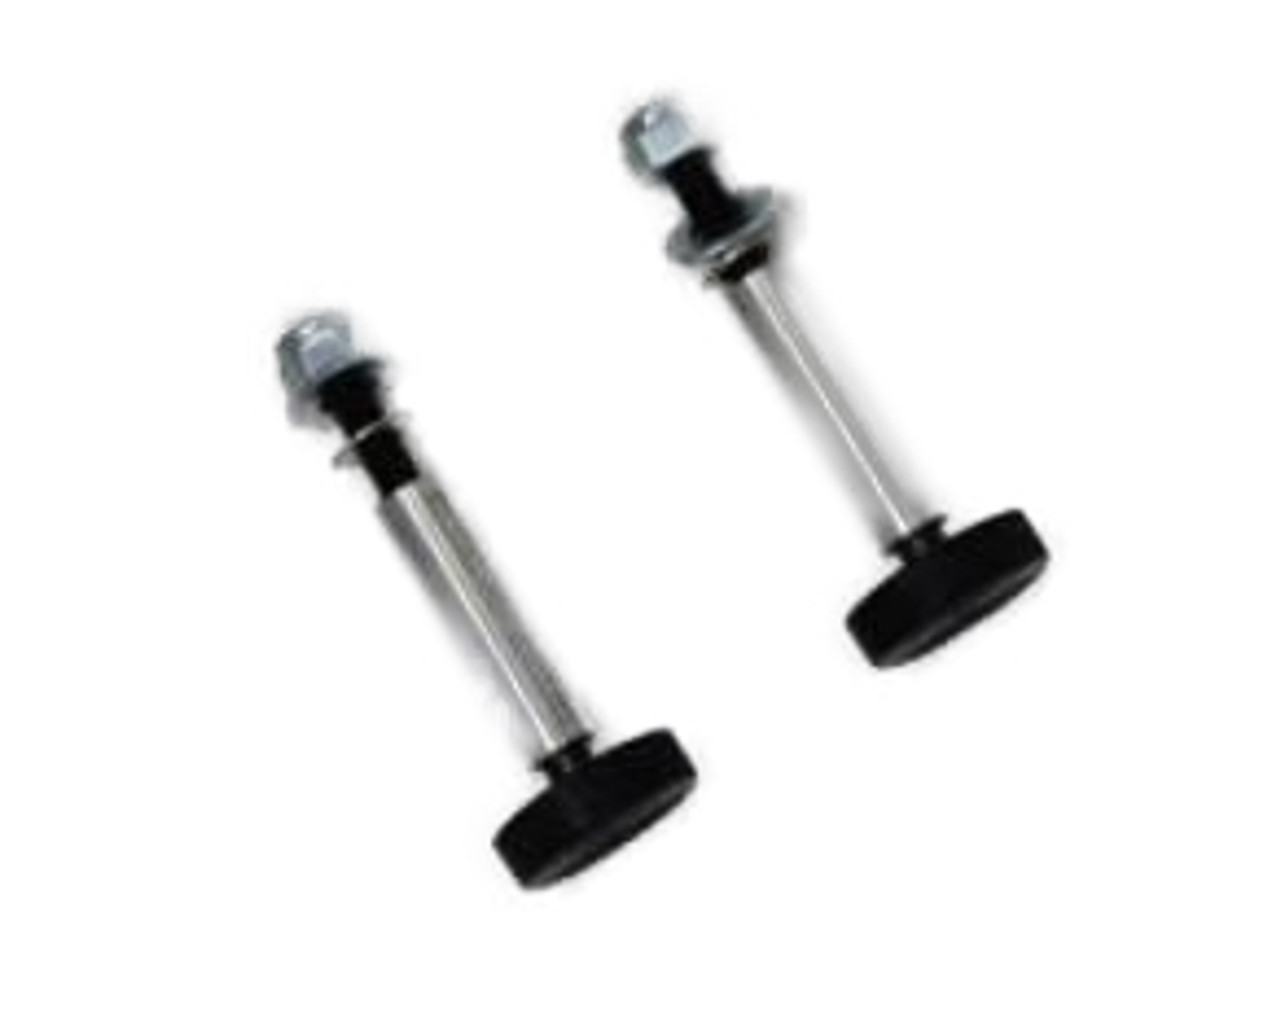 Looking for Leander Cervical Cushion Adjustment Knob Set, Leander Cervical Knob, Leander Cervical Cushion Knobs, Leander Cervical Knob, Leander Cushion Knob, Leander Cervical Cushion Mounting Knob Knob, replacement Leander Cervical Knob, Leander Cervical Knob for sale, Leander Cervical Cushion Knob?